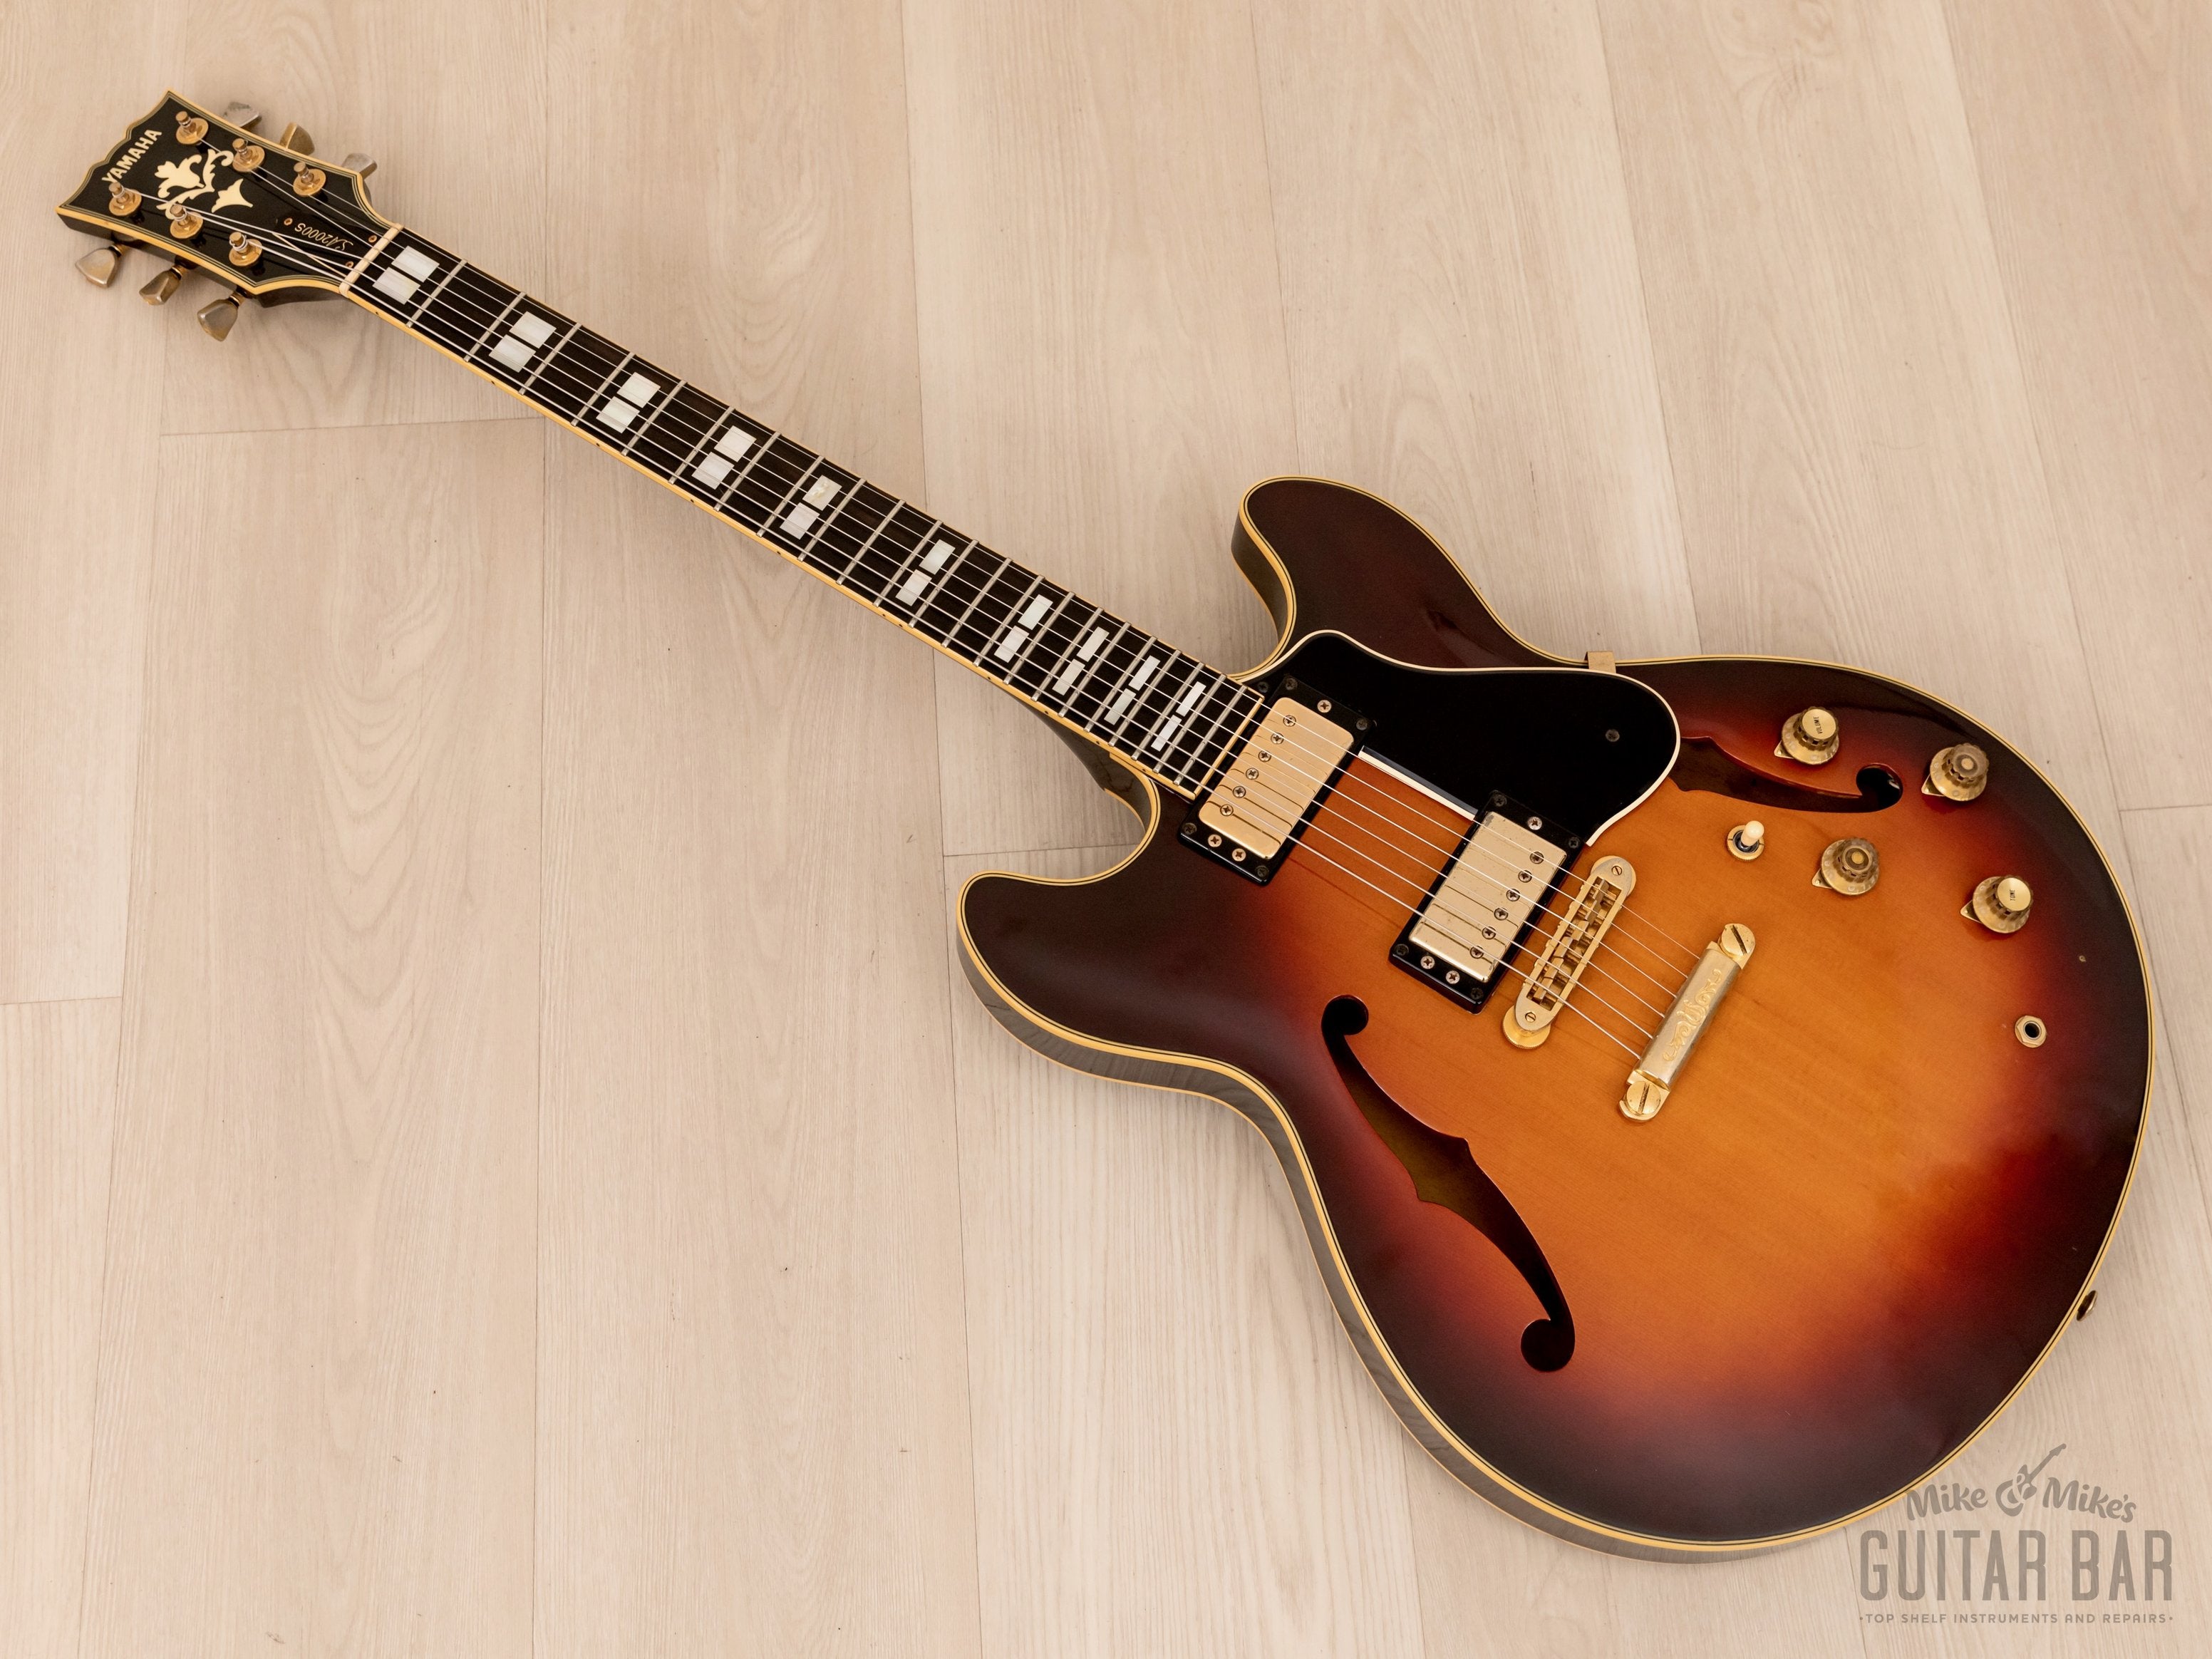 1979 Yamaha SA2000S Vintage Semi-Hollowbody ES-Style Guitar w/ Carved Spruce Top, Antique Stain